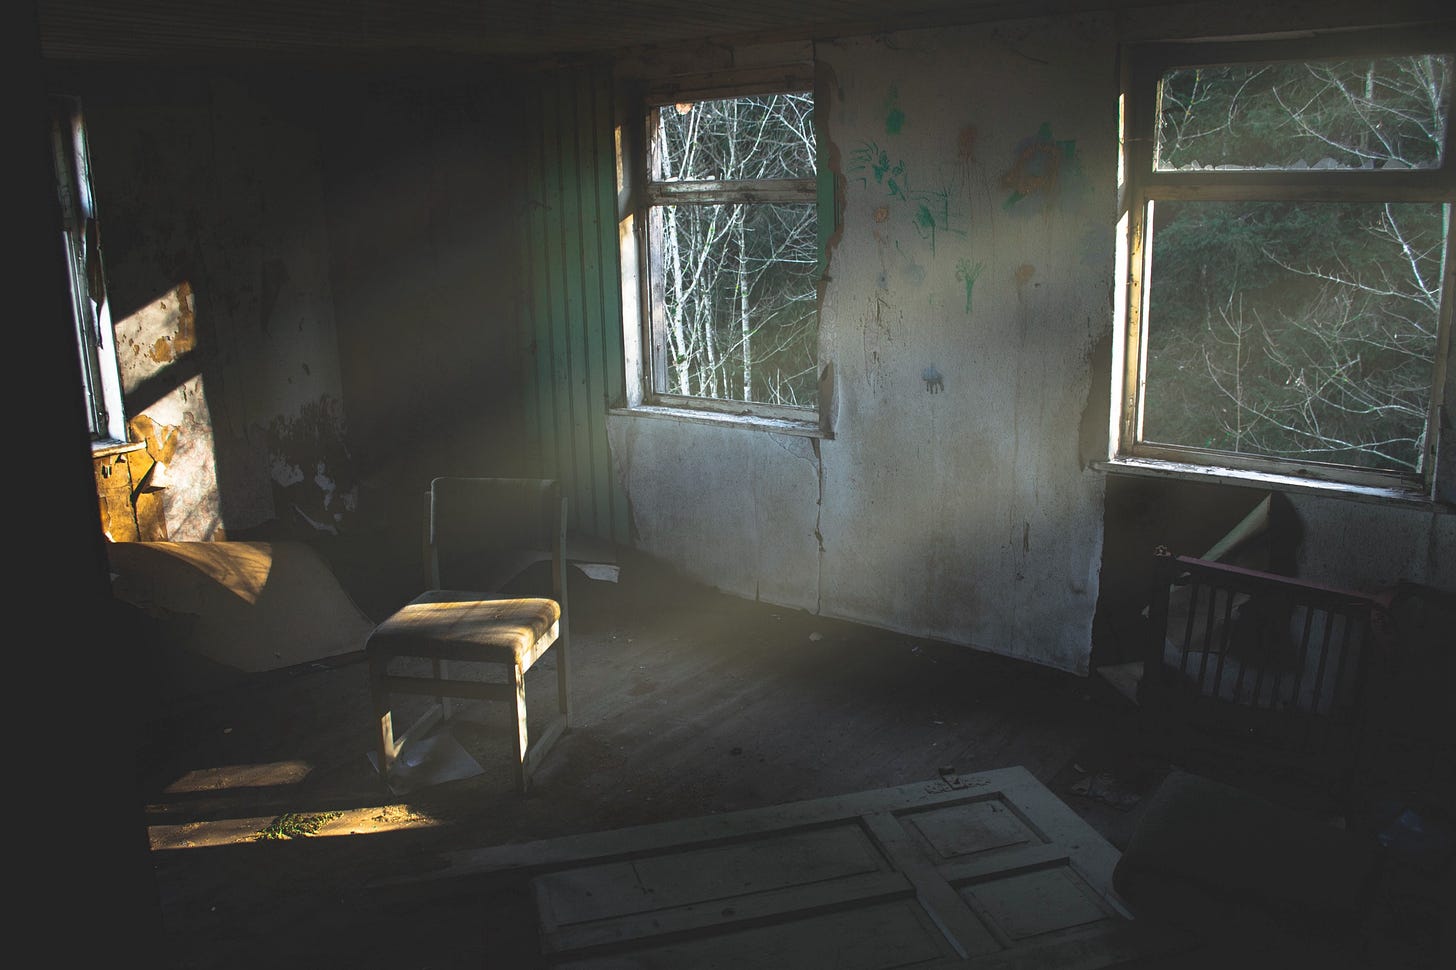 image inside a derelict building for article titled “the illusion of tomorrow”